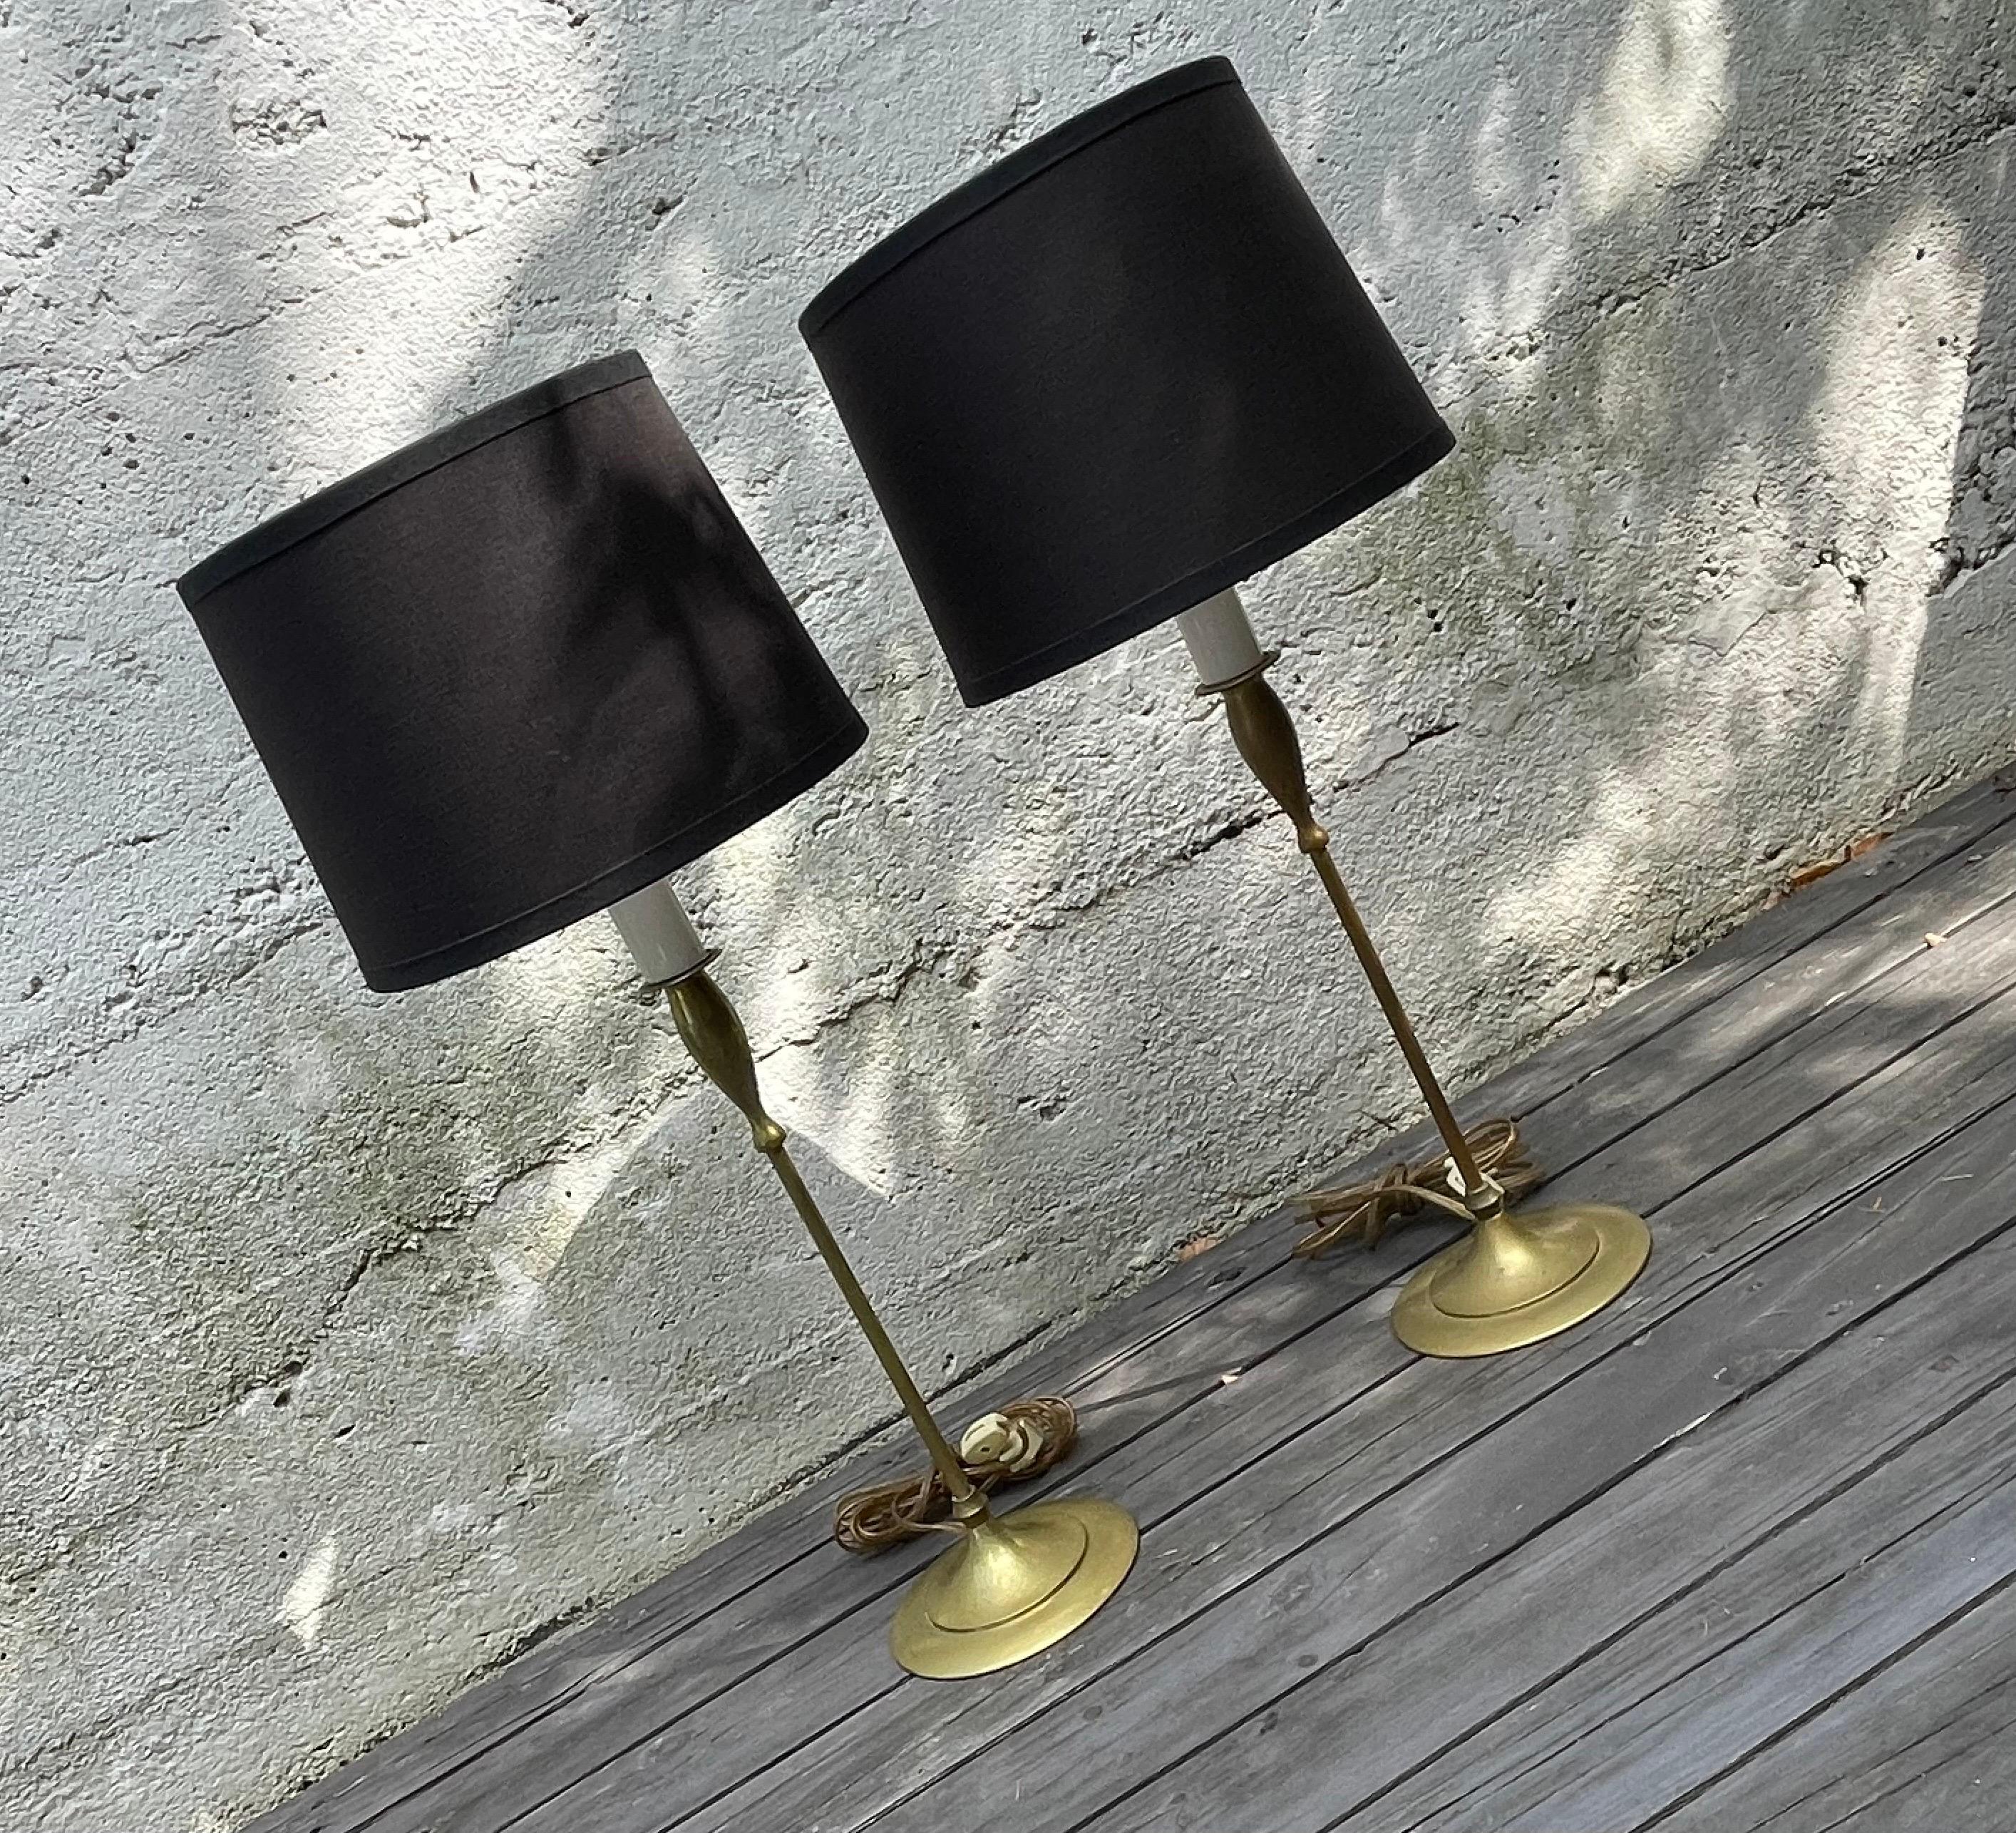 Sexy pair of Hollywood Regency brass tulip base table lamps by Charles Parker Co.  

19 inches to top of socket, 25 inches to top of harp, shades by RH slightly tapered and 7.75 inches in diameter, not included in the sale.